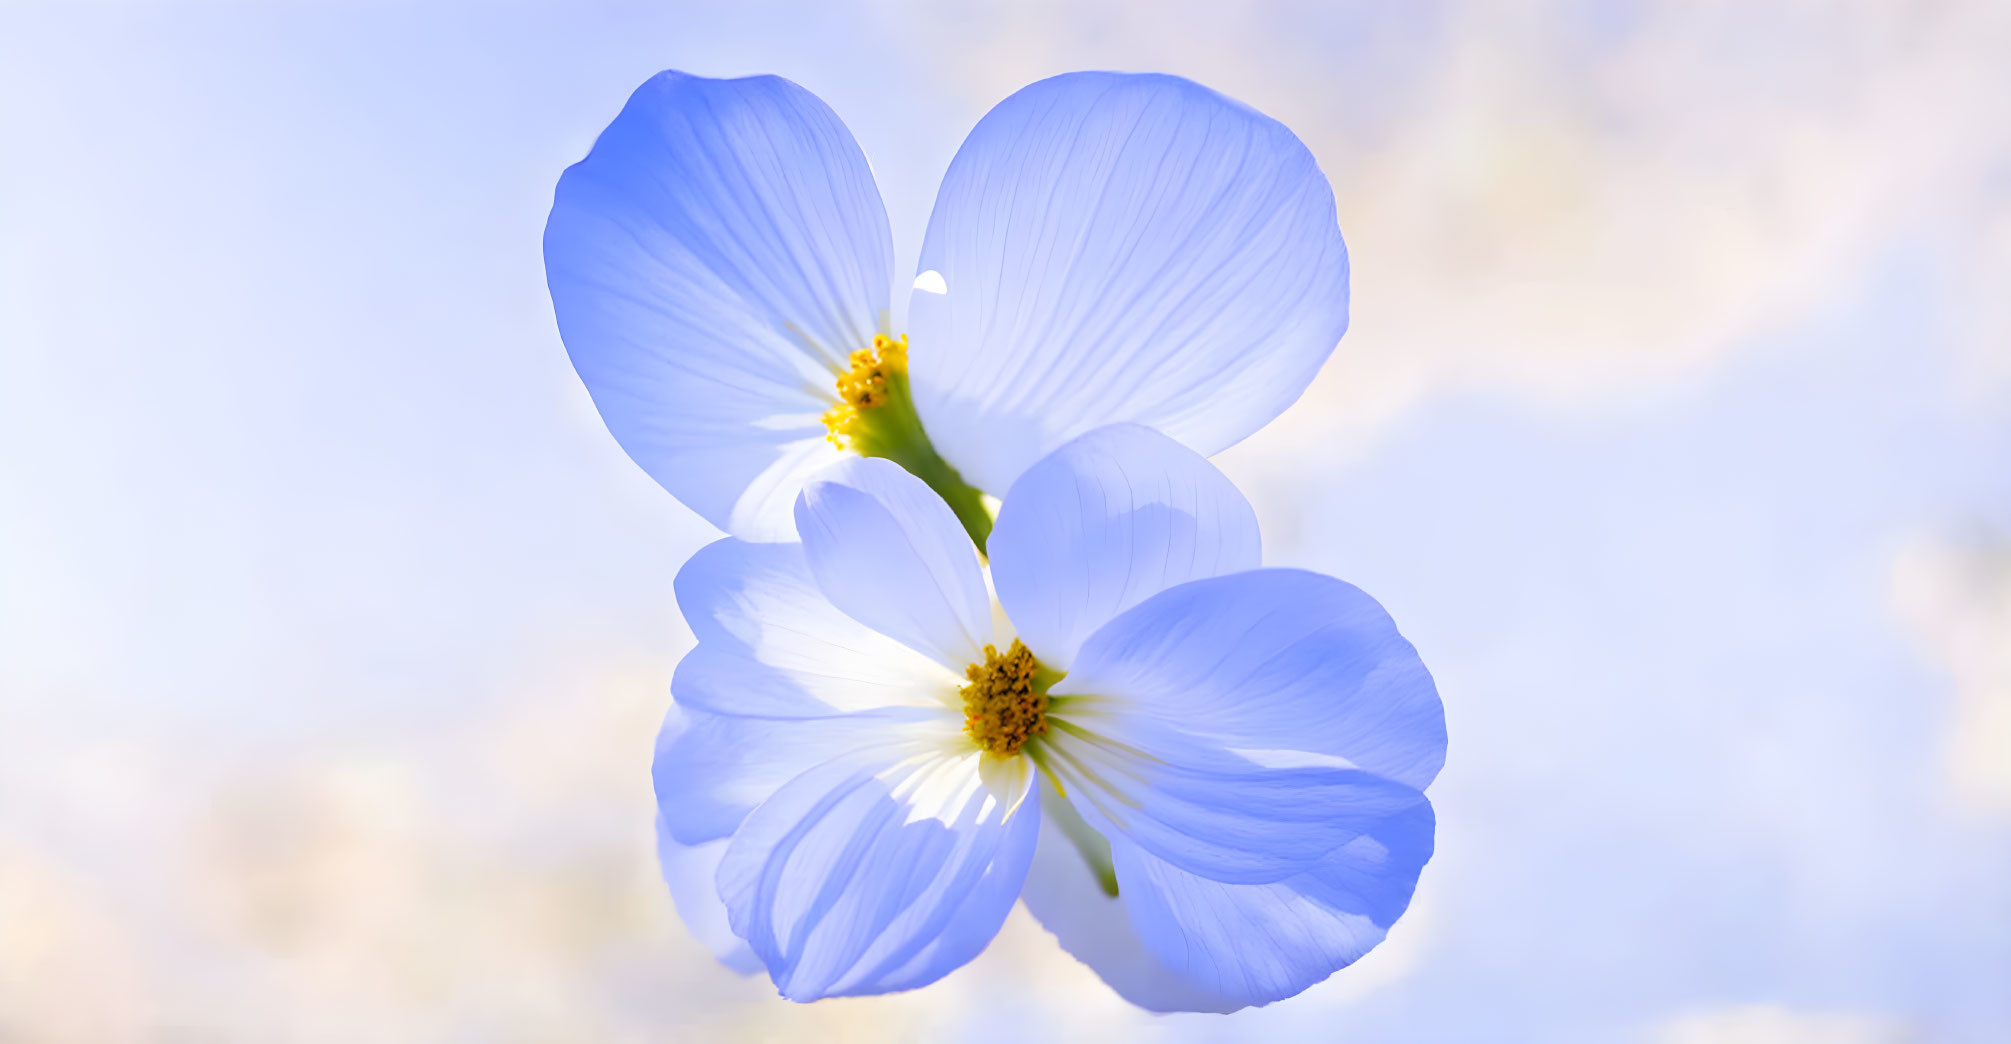 Delicate Blue Flower with Translucent Petals on Soft-focus Background